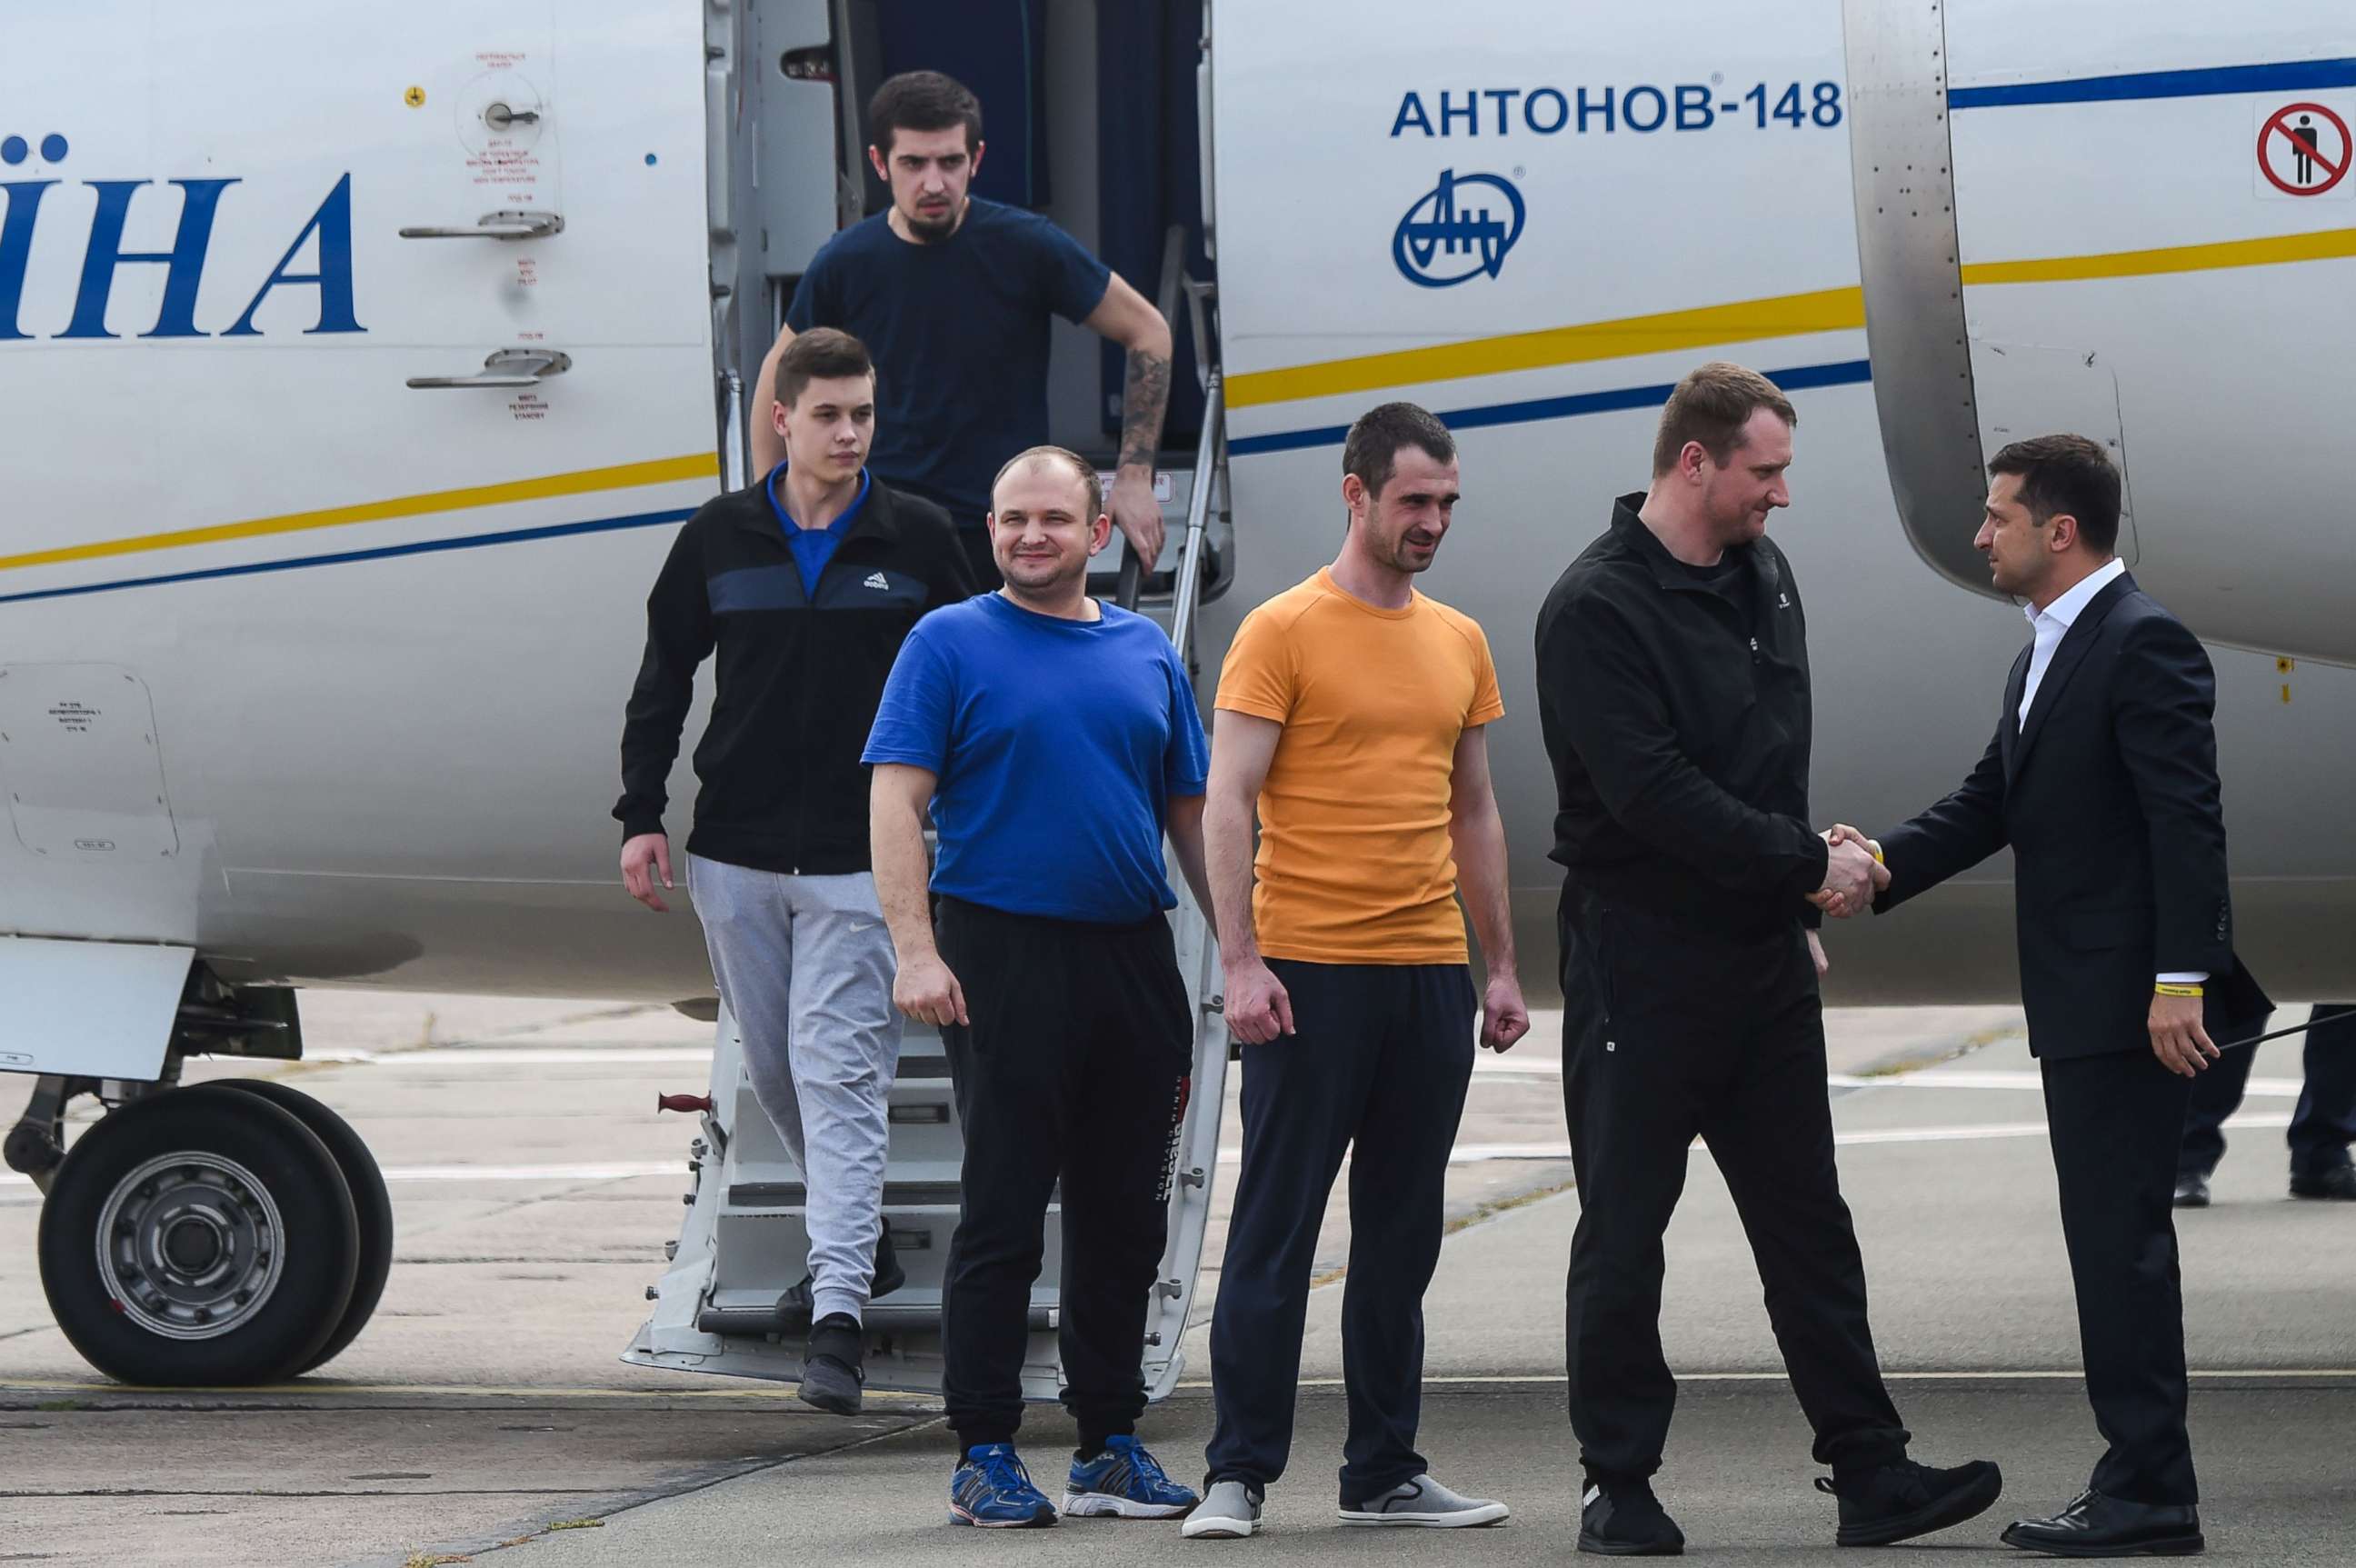 PHOTO: Ukraine's President Volodymyr Zelensky welcomes former prisoners as they disembark from a plane on September 7, 2019 at Boryspil international airport in Kiev after a long-awaited exchange of prisoners between Moscow and Kiev.